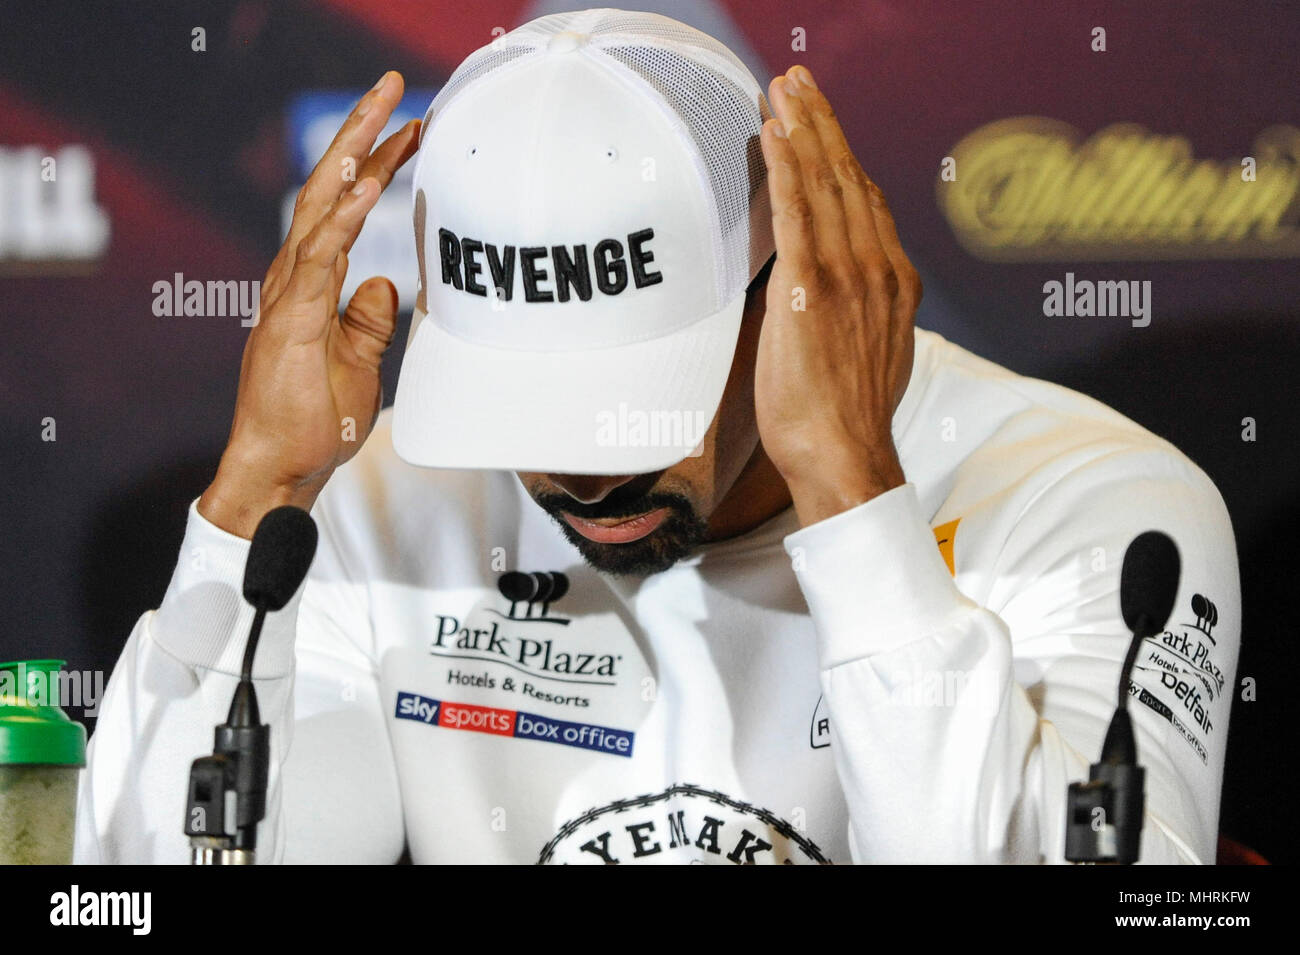 London, UK.  3 May 2018. David Haye at a press conference for the Tony Bellew v David Haye heavyweight rematch at the Park Plaza hotel in Westminster.  The fight takes place at The O2, London on 5 May 2018.  Credit: Stephen Chung / Alamy Live News Stock Photo